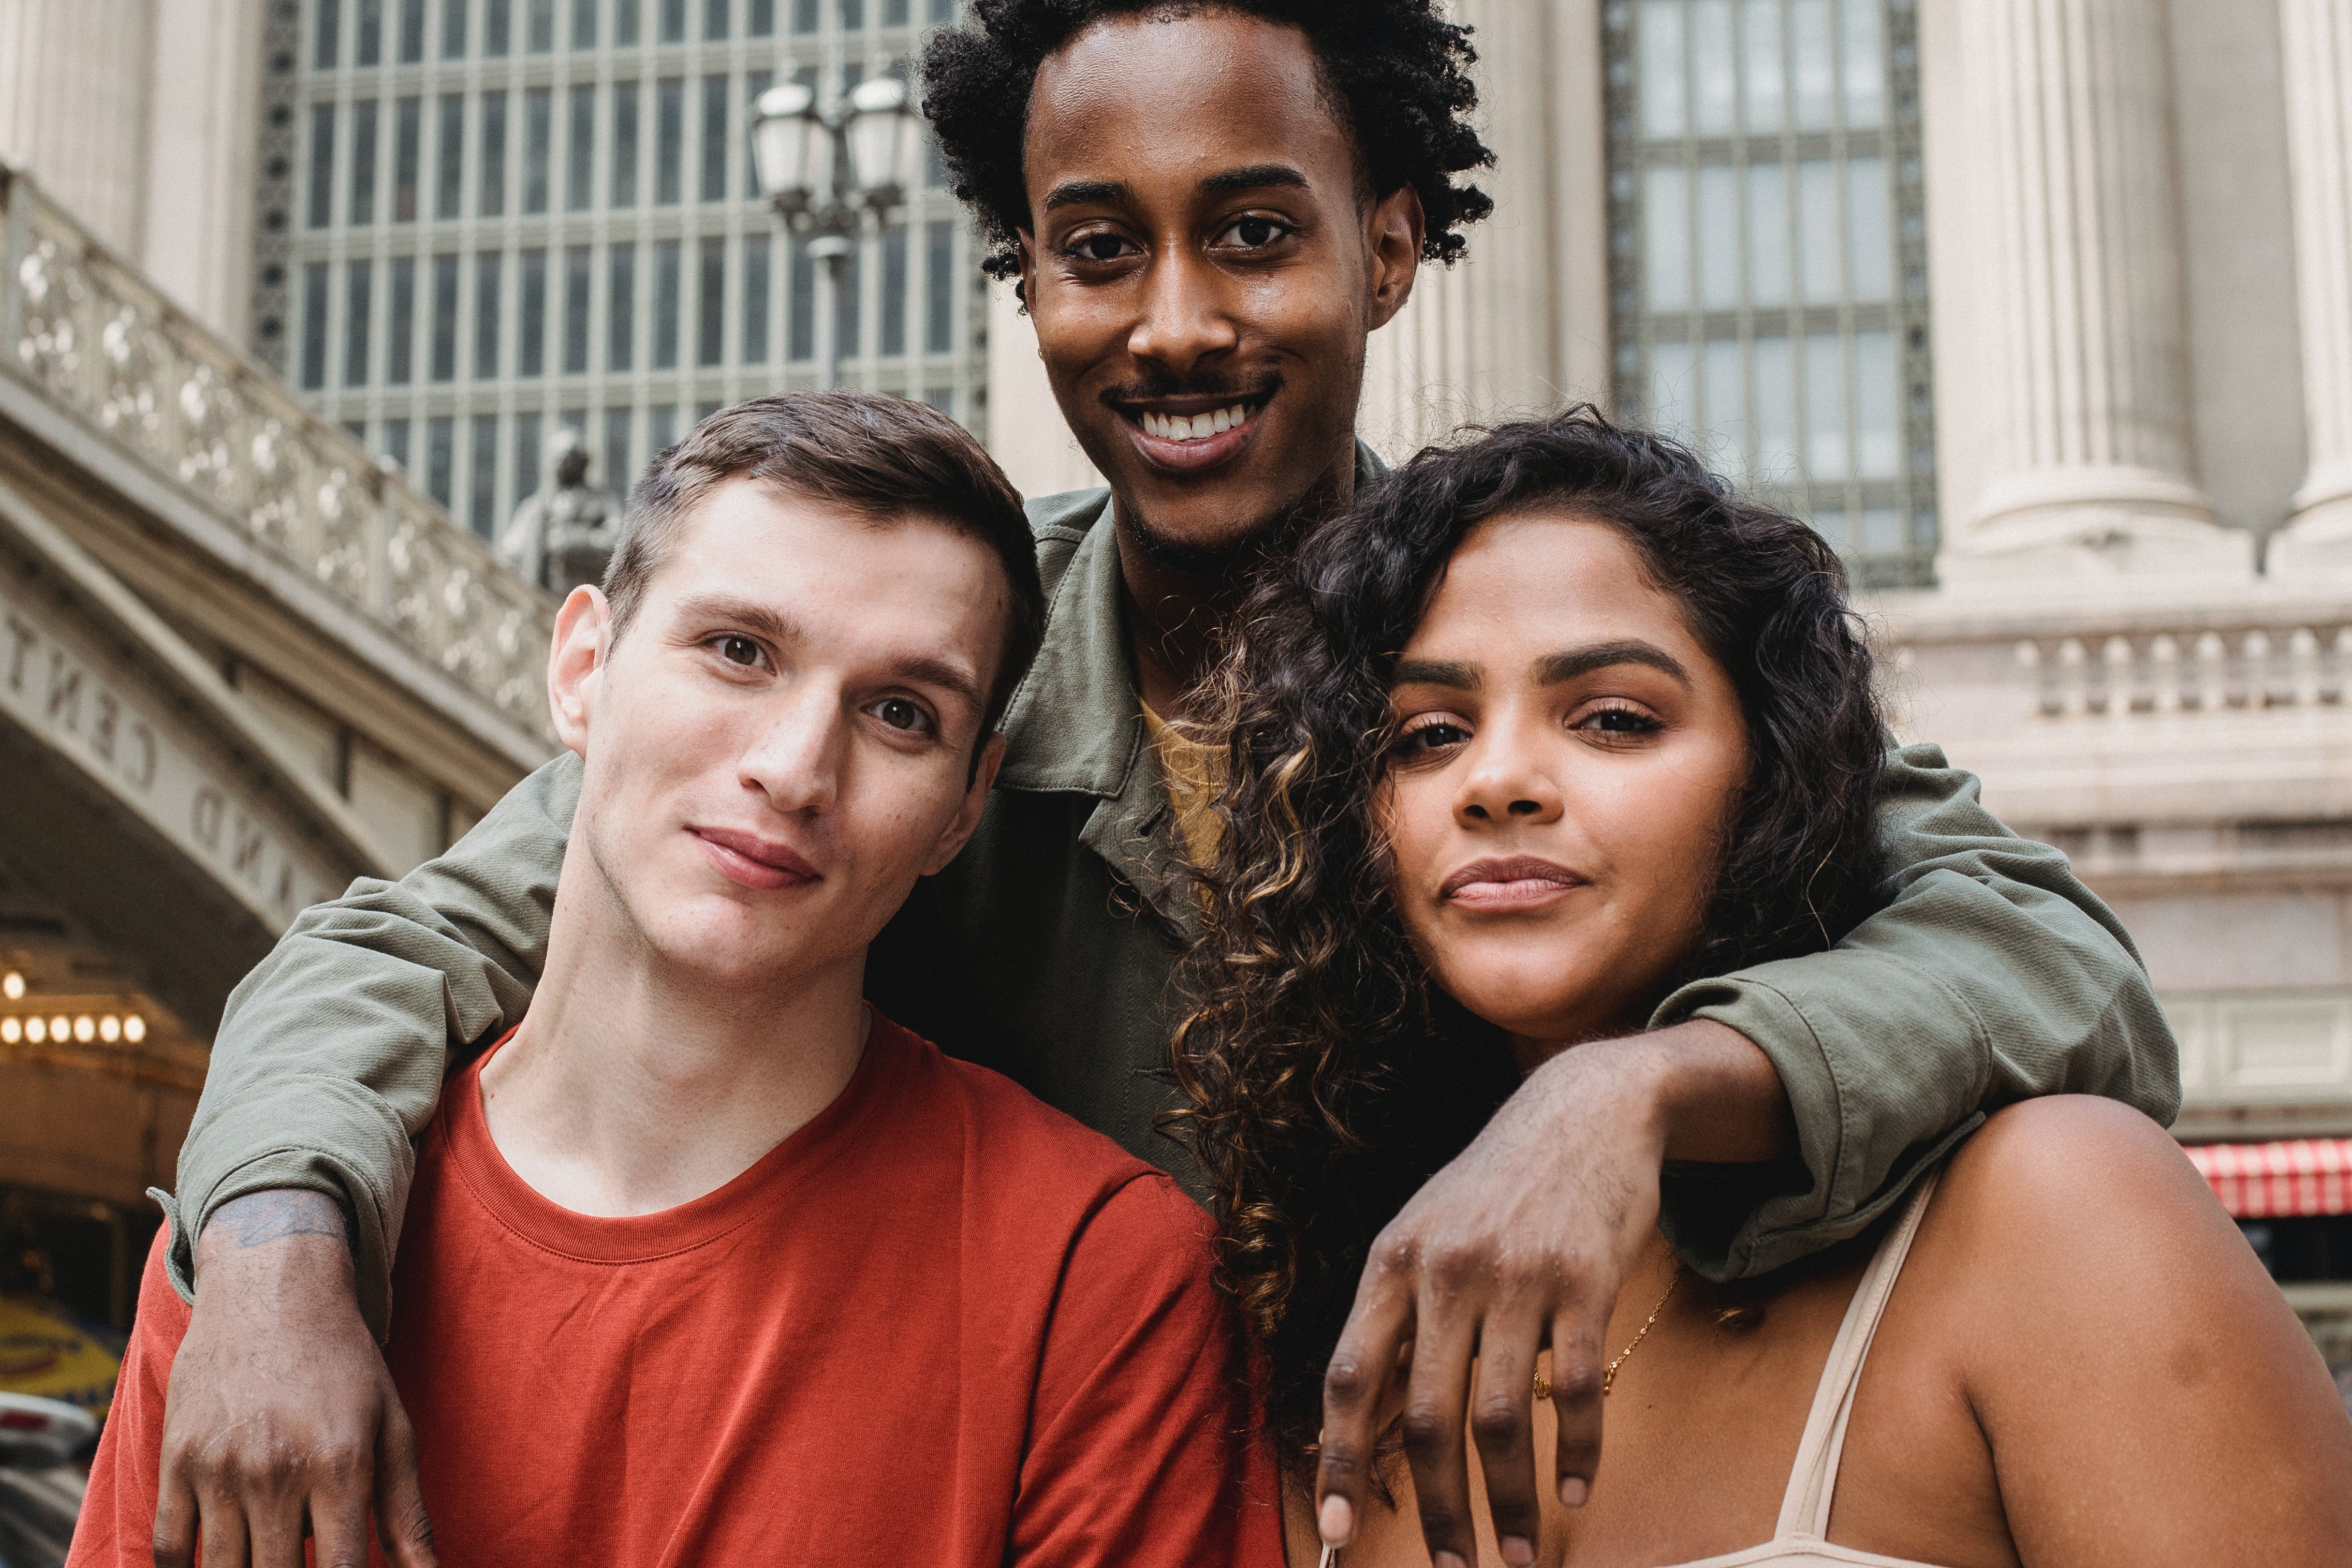 Image of 3 multi ethnic attractive friends. There is a man with a red shirt and a woman with curly hair being hugged by another friend above them.